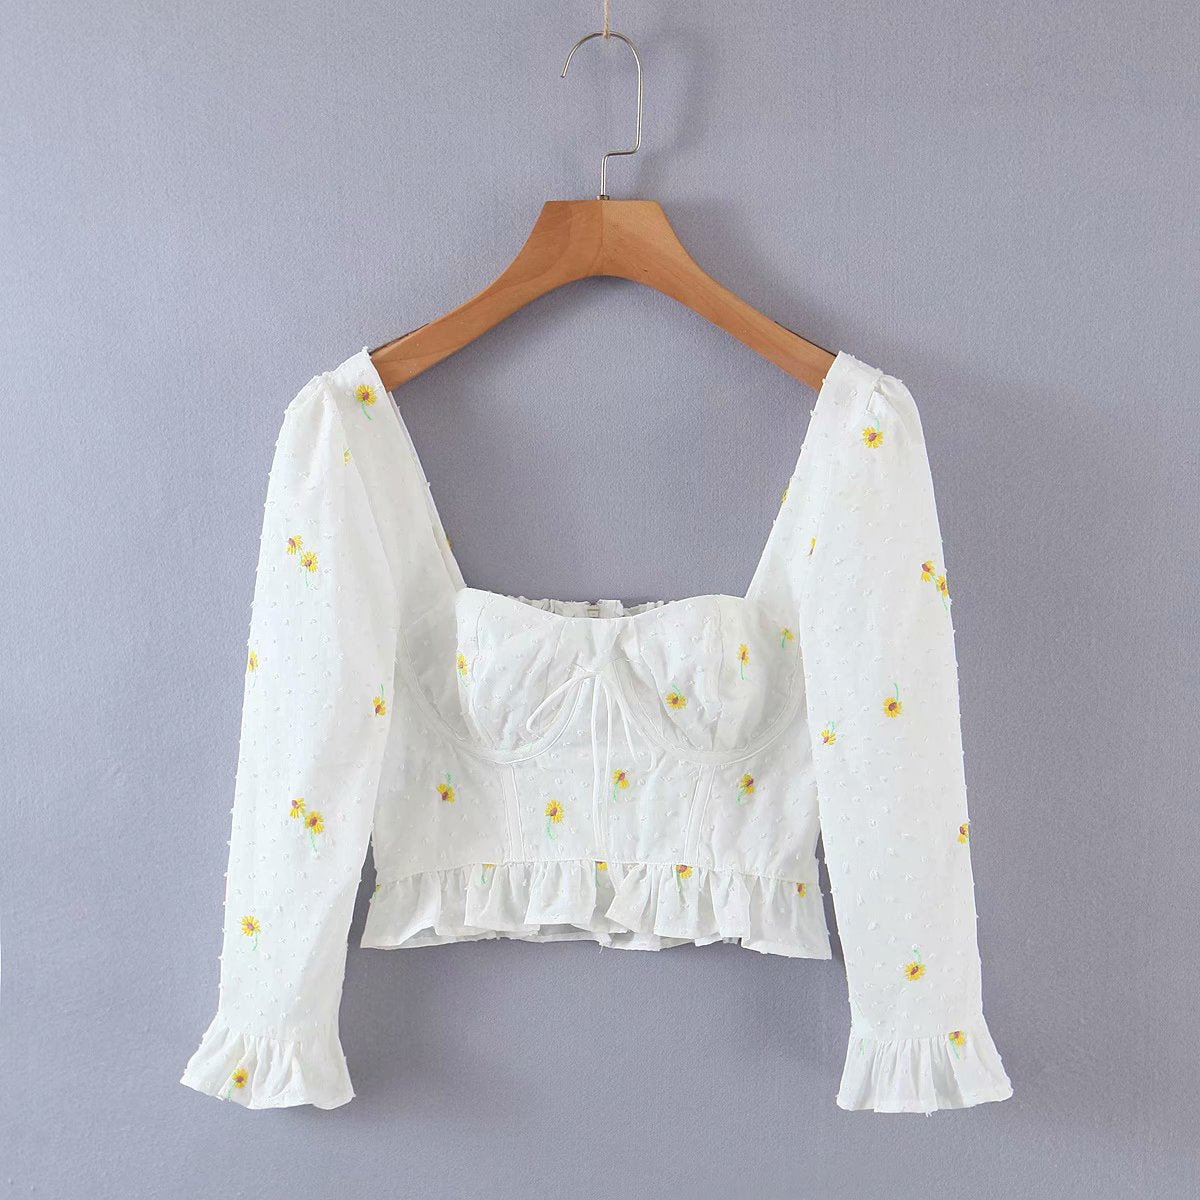 OOTDGIRL Spring And Summer Blouses Women New Retro Daisy Embroidery Ruffled Short Sleeve Corset Shirt Top Pullover Blouse